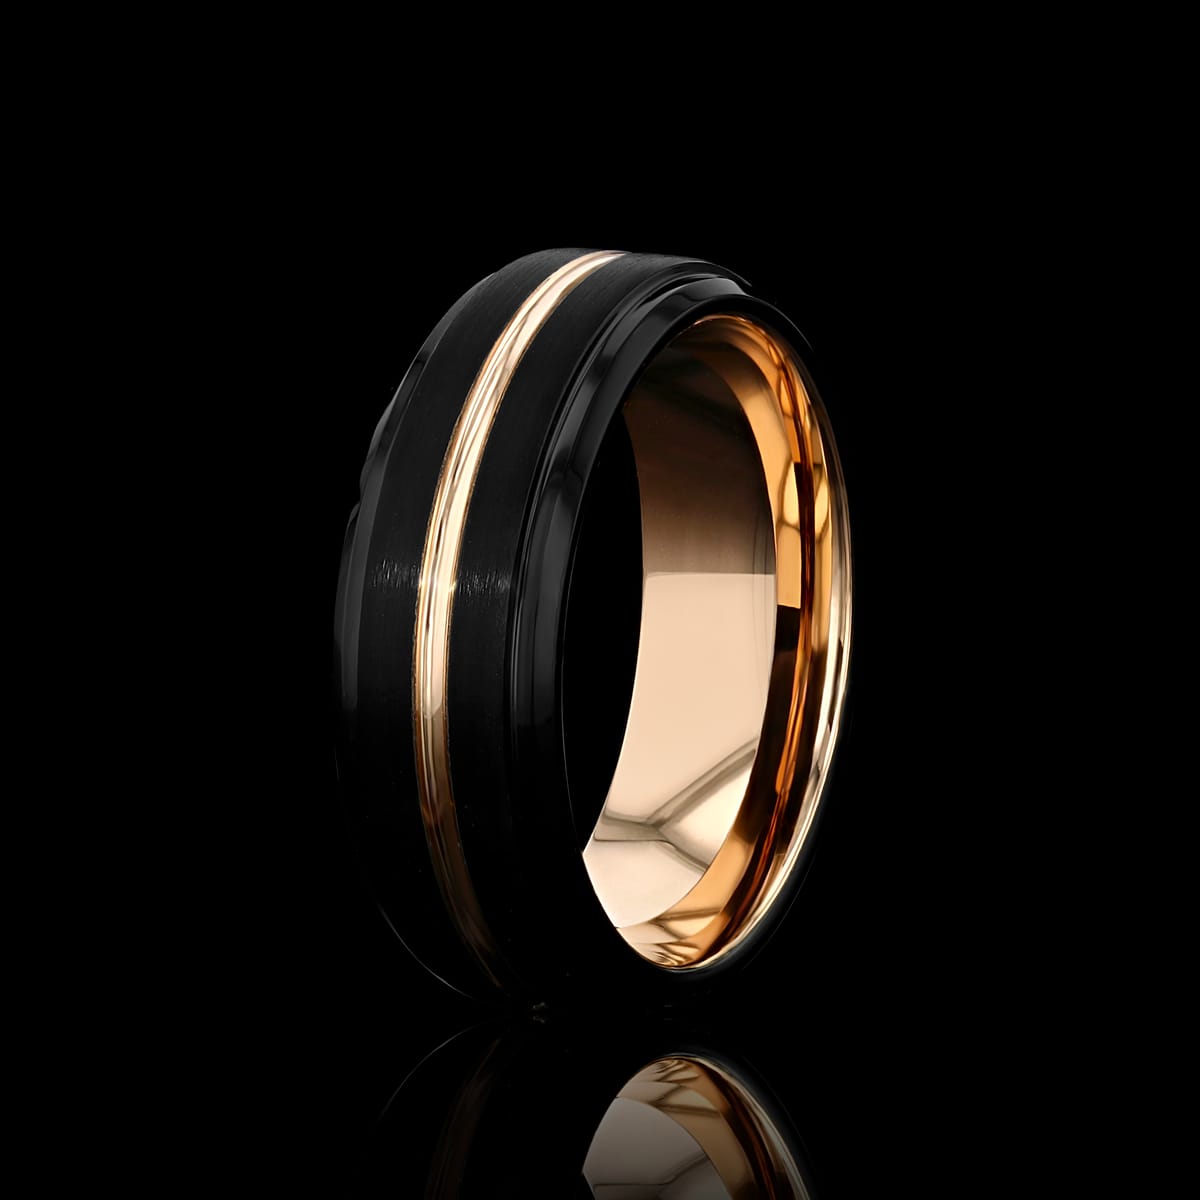 The Equinox ring collection